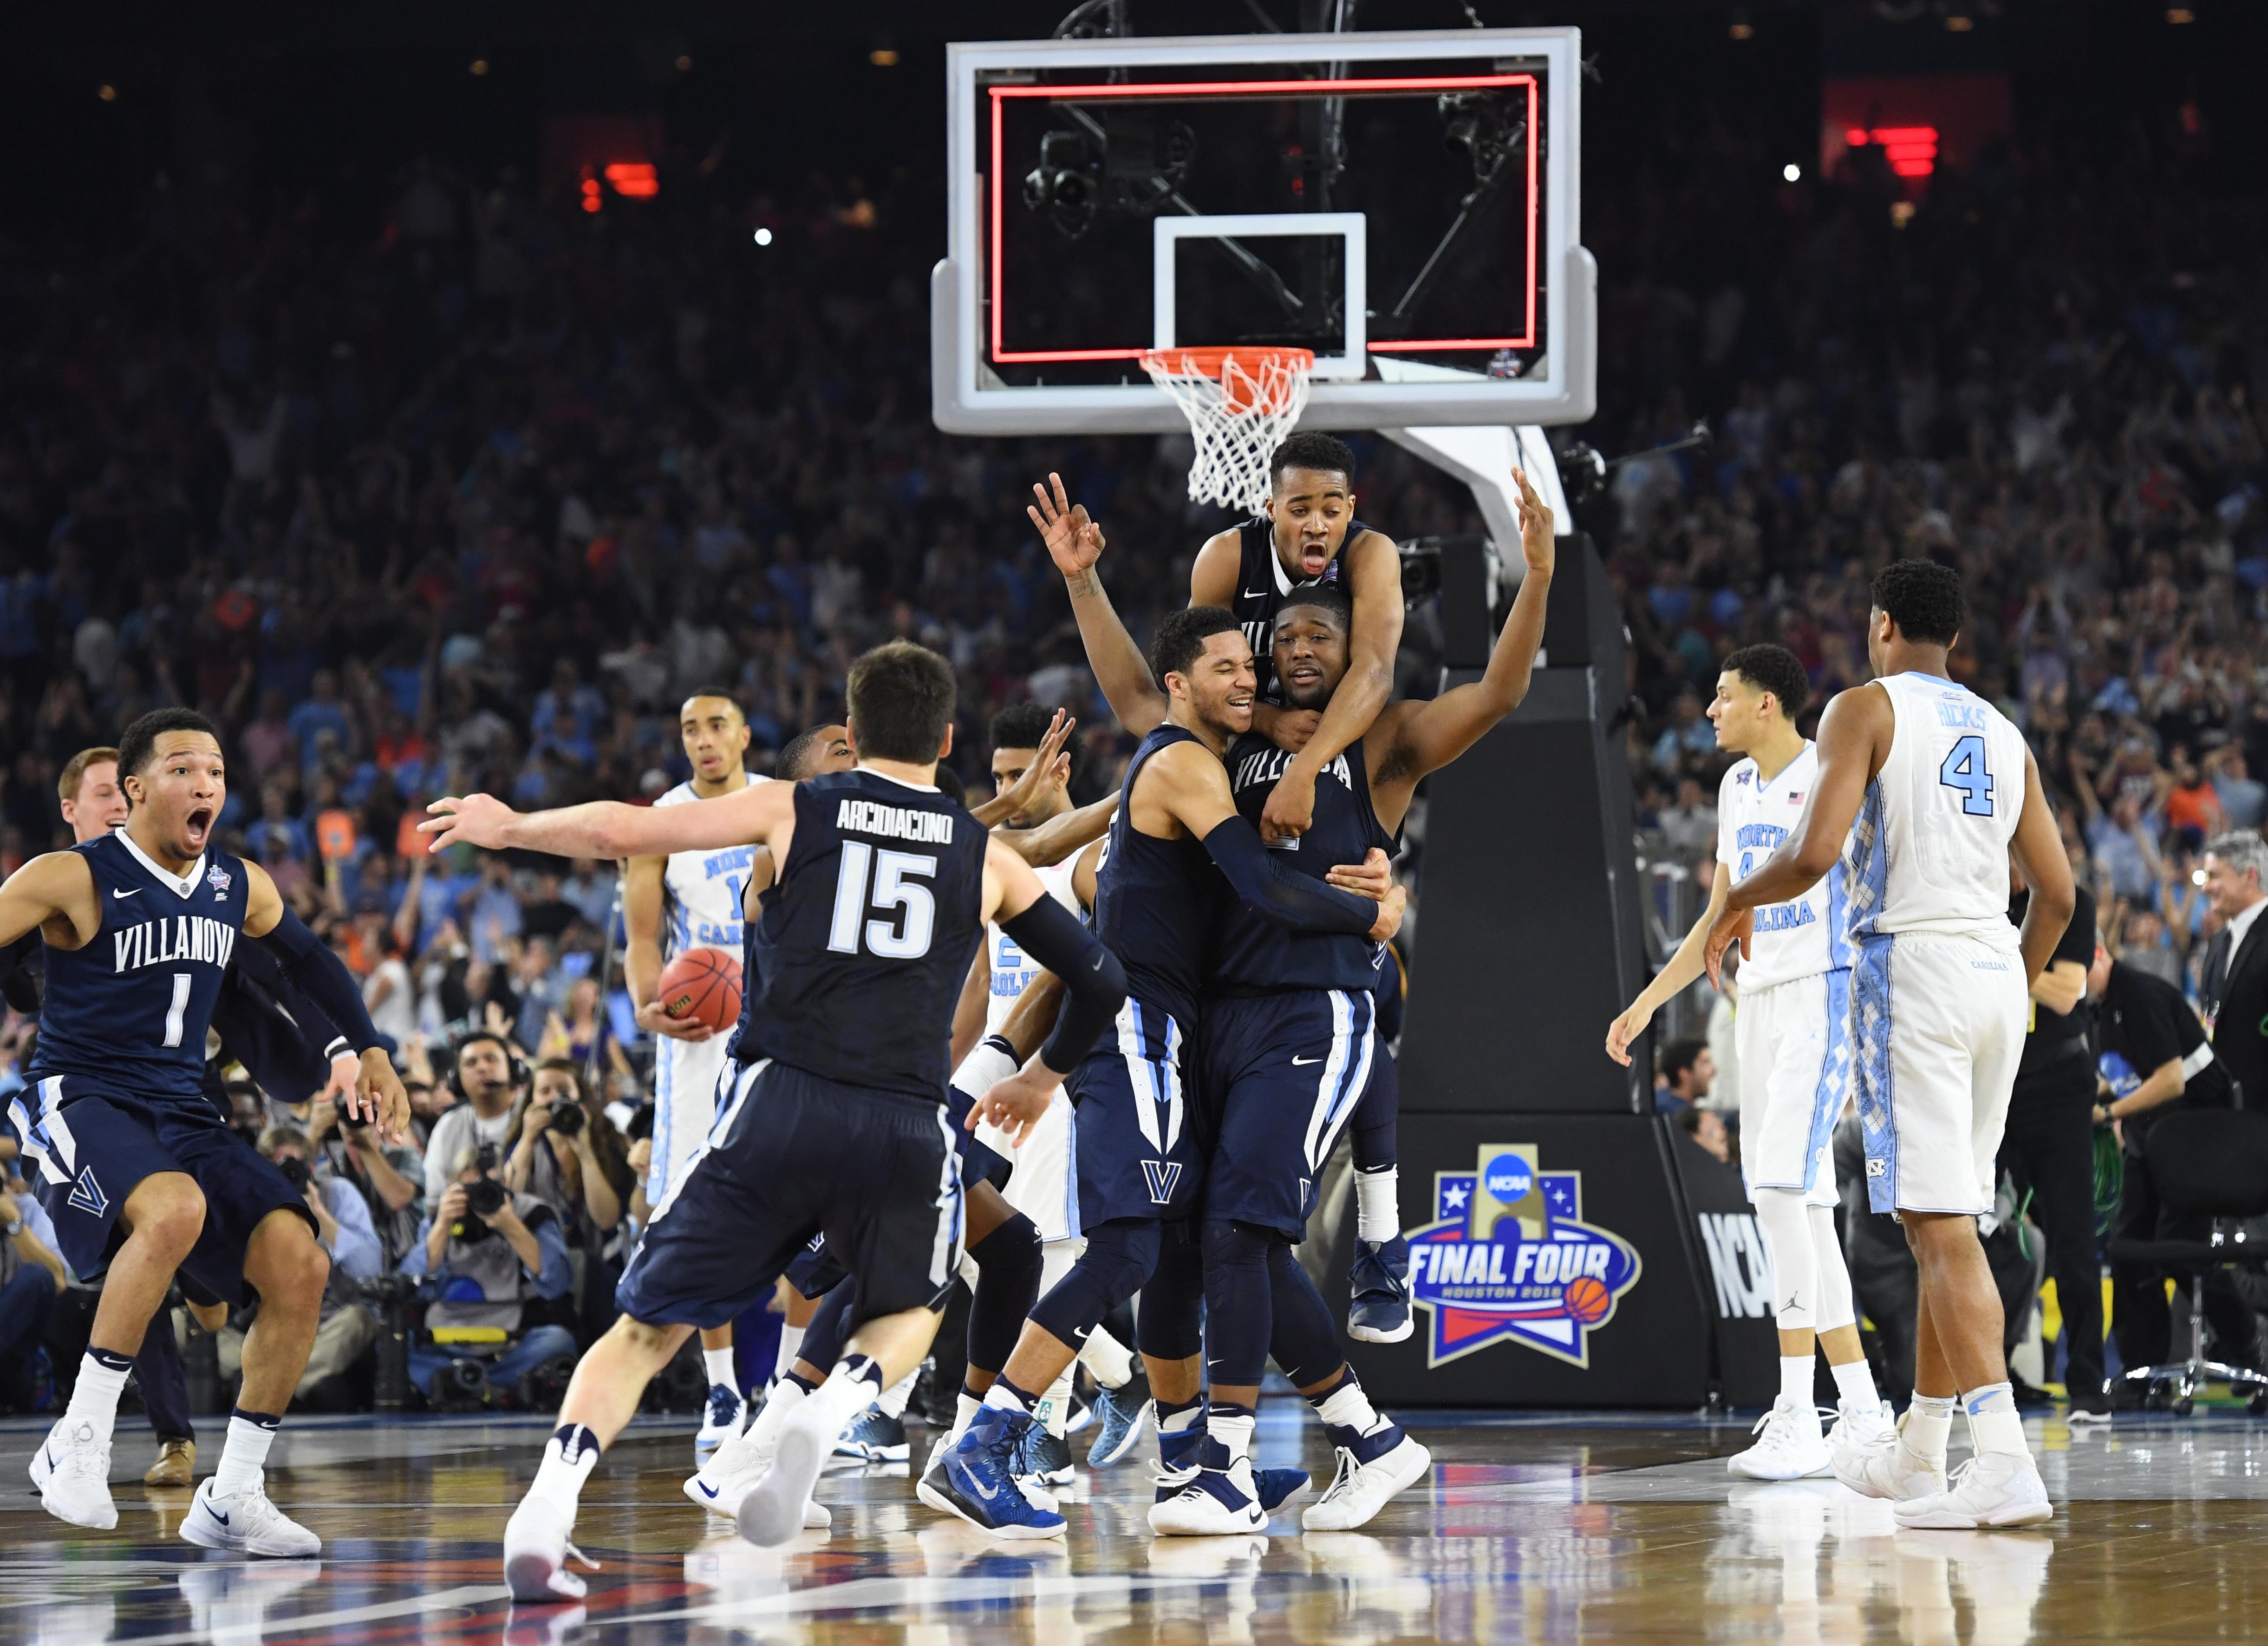 Apr 4, 2016; Houston, TX, USA; Villanova Wildcats forward Kris Jenkins (2) celebrates with teammates after making the game-winning shot against the North Carolina Tar Heels in the championship game of the 2016 NCAA Men's Final Four at NRG Stadium. Mandatory Credit: Robert Deutsch-USA TODAY Sports